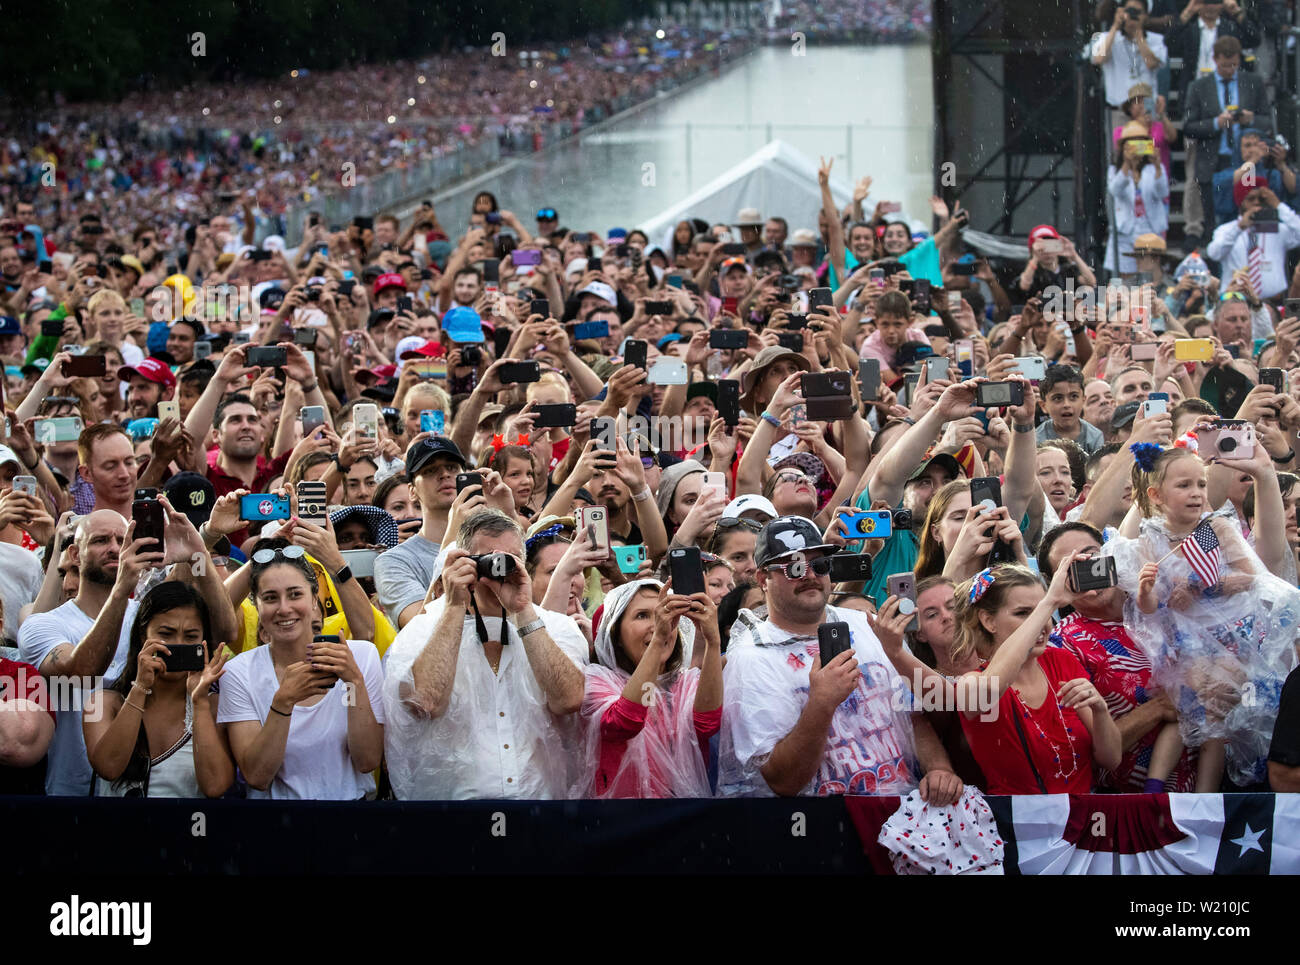 Attendees cheer as U.S. President Donald Trump speaks during the Fourth of July Celebration 'Salute to America' event in Washington, DC, U.S., on Thursday, July 4, 2019. The White House said Trump's message won't be political -- Trump is calling the speech a 'Salute to America' -- but it comes as the 2020 campaign is heating up. Credit: Al Drago/Pool via CNP/MediaPunch Stock Photo